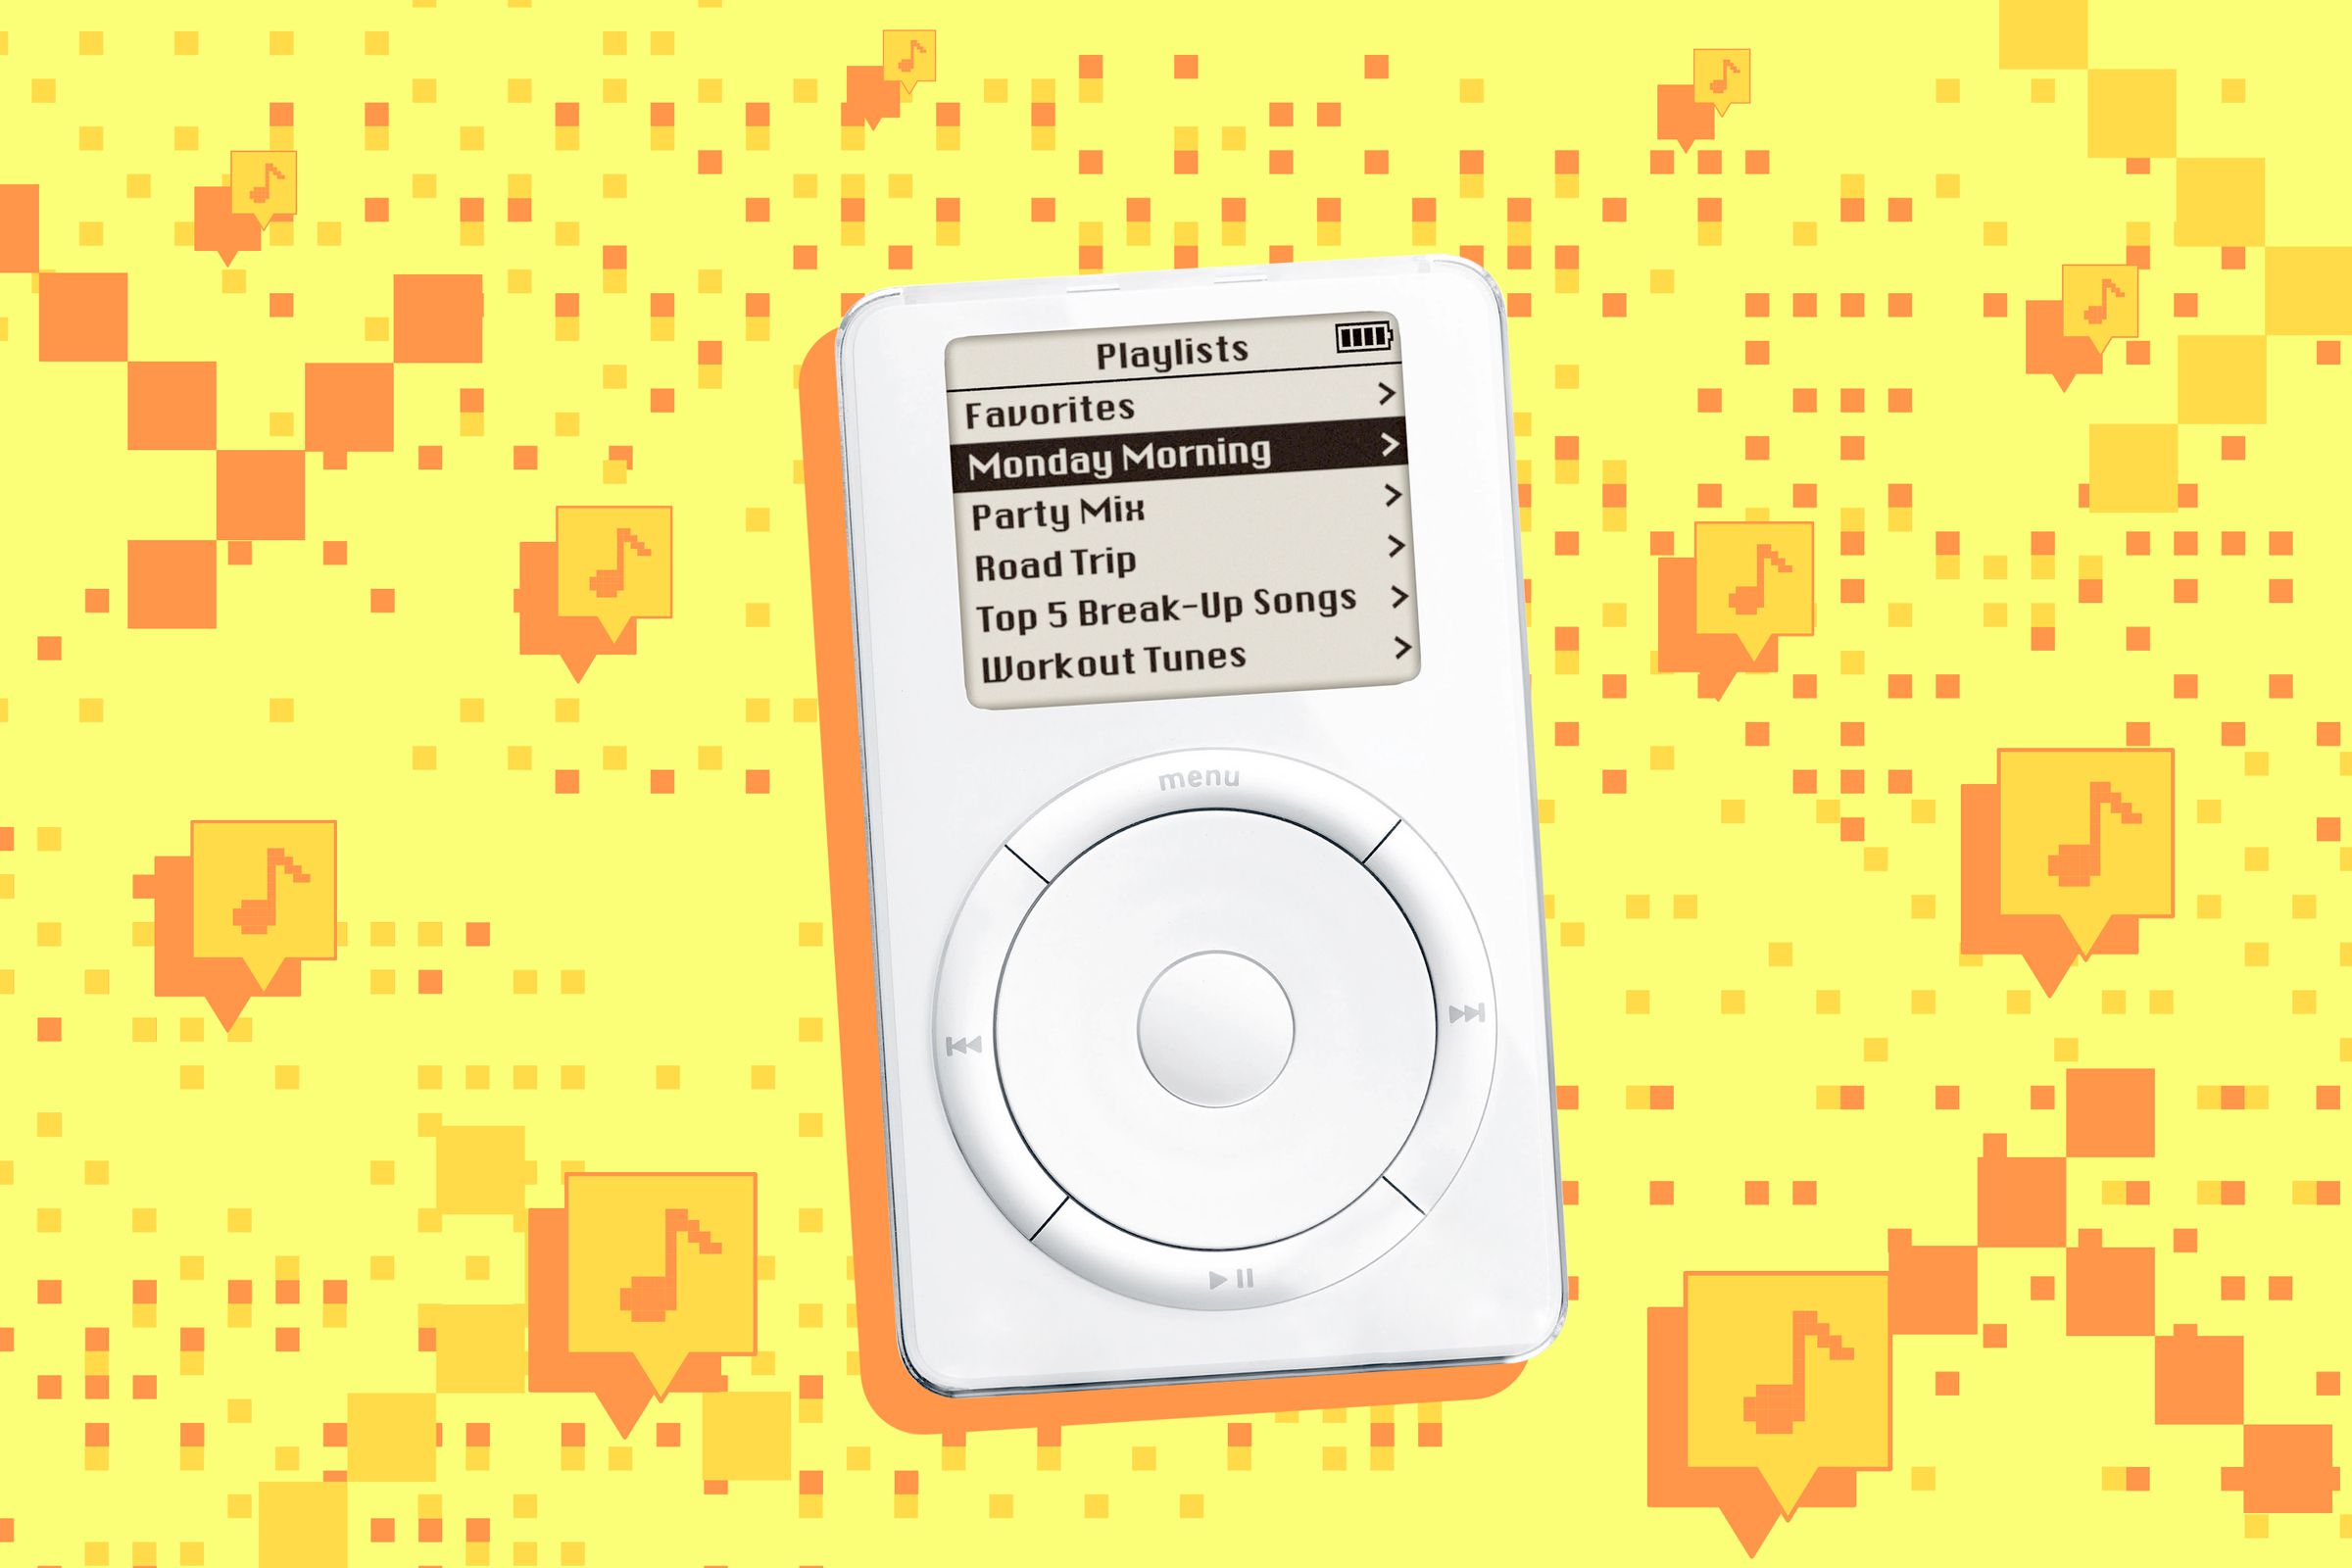 The Retro Pod app, which was pulled from the App Store, which turns your iPhone into an iPod.